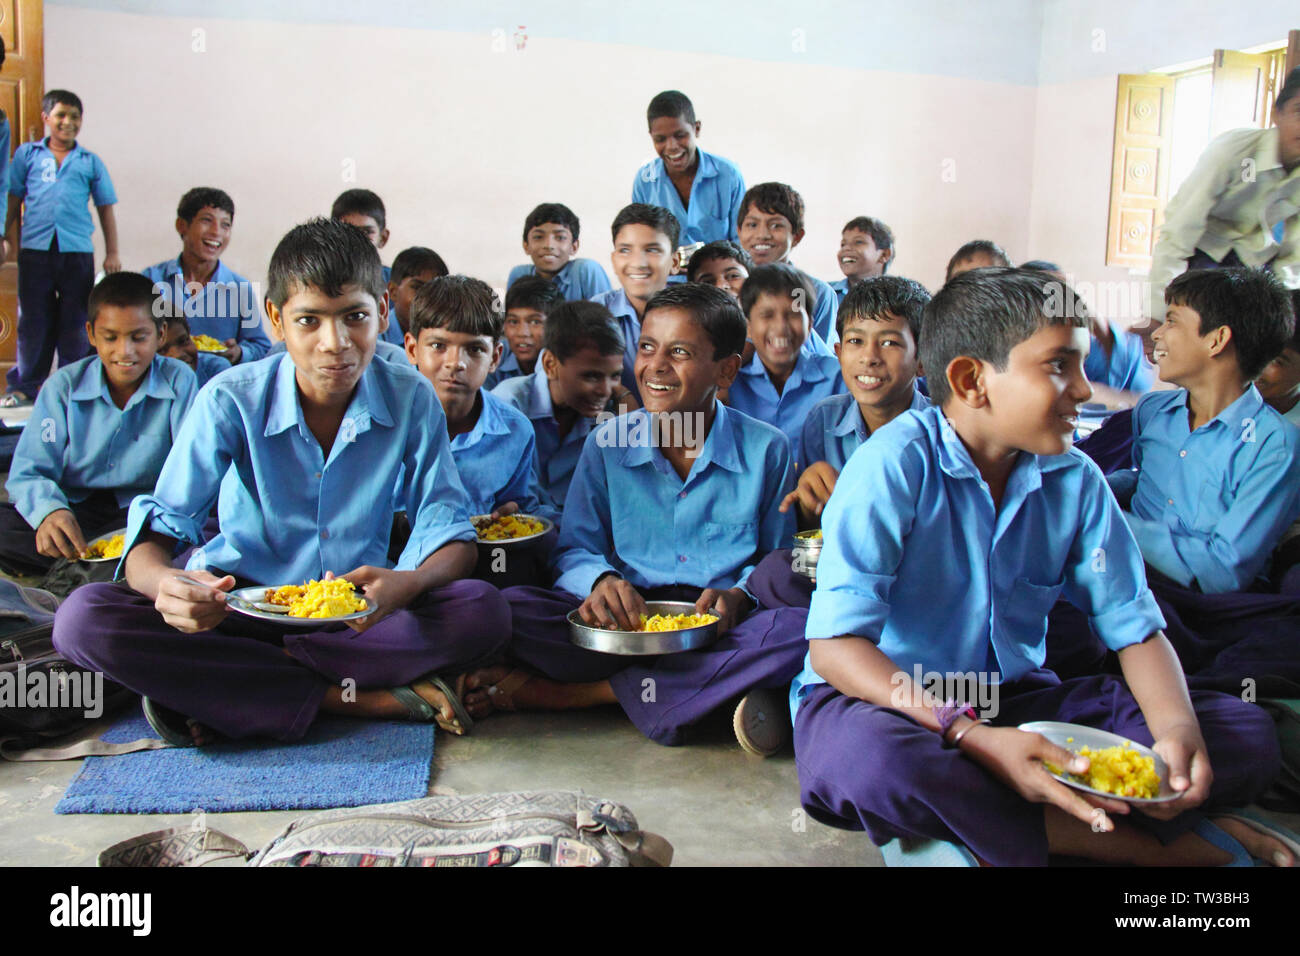 Students having mid day meal, India Stock Photo